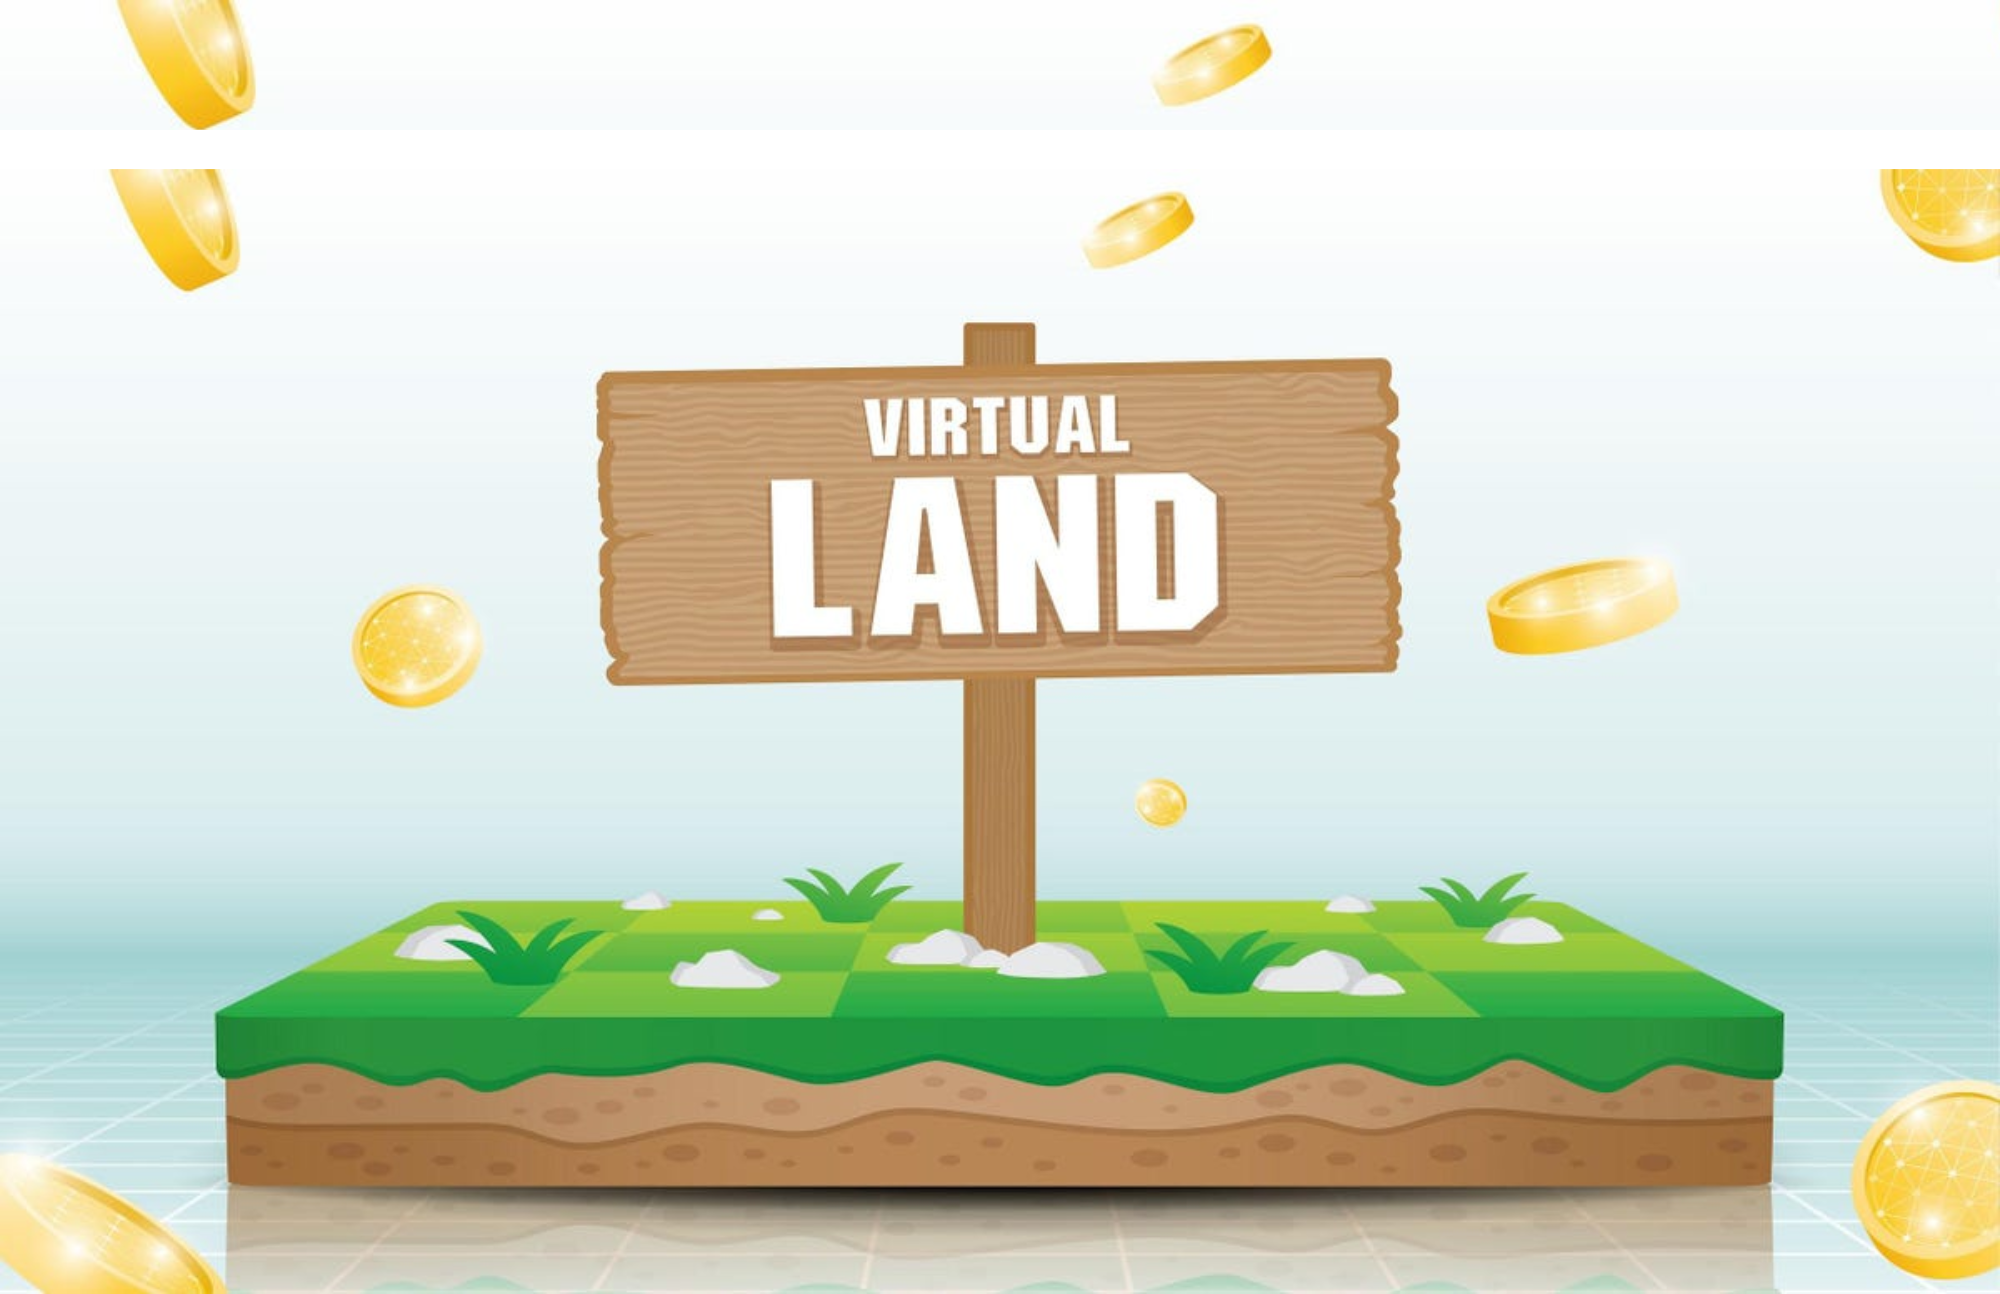 A grassy area with a large sign reading "Virtual Land" and coins falling out